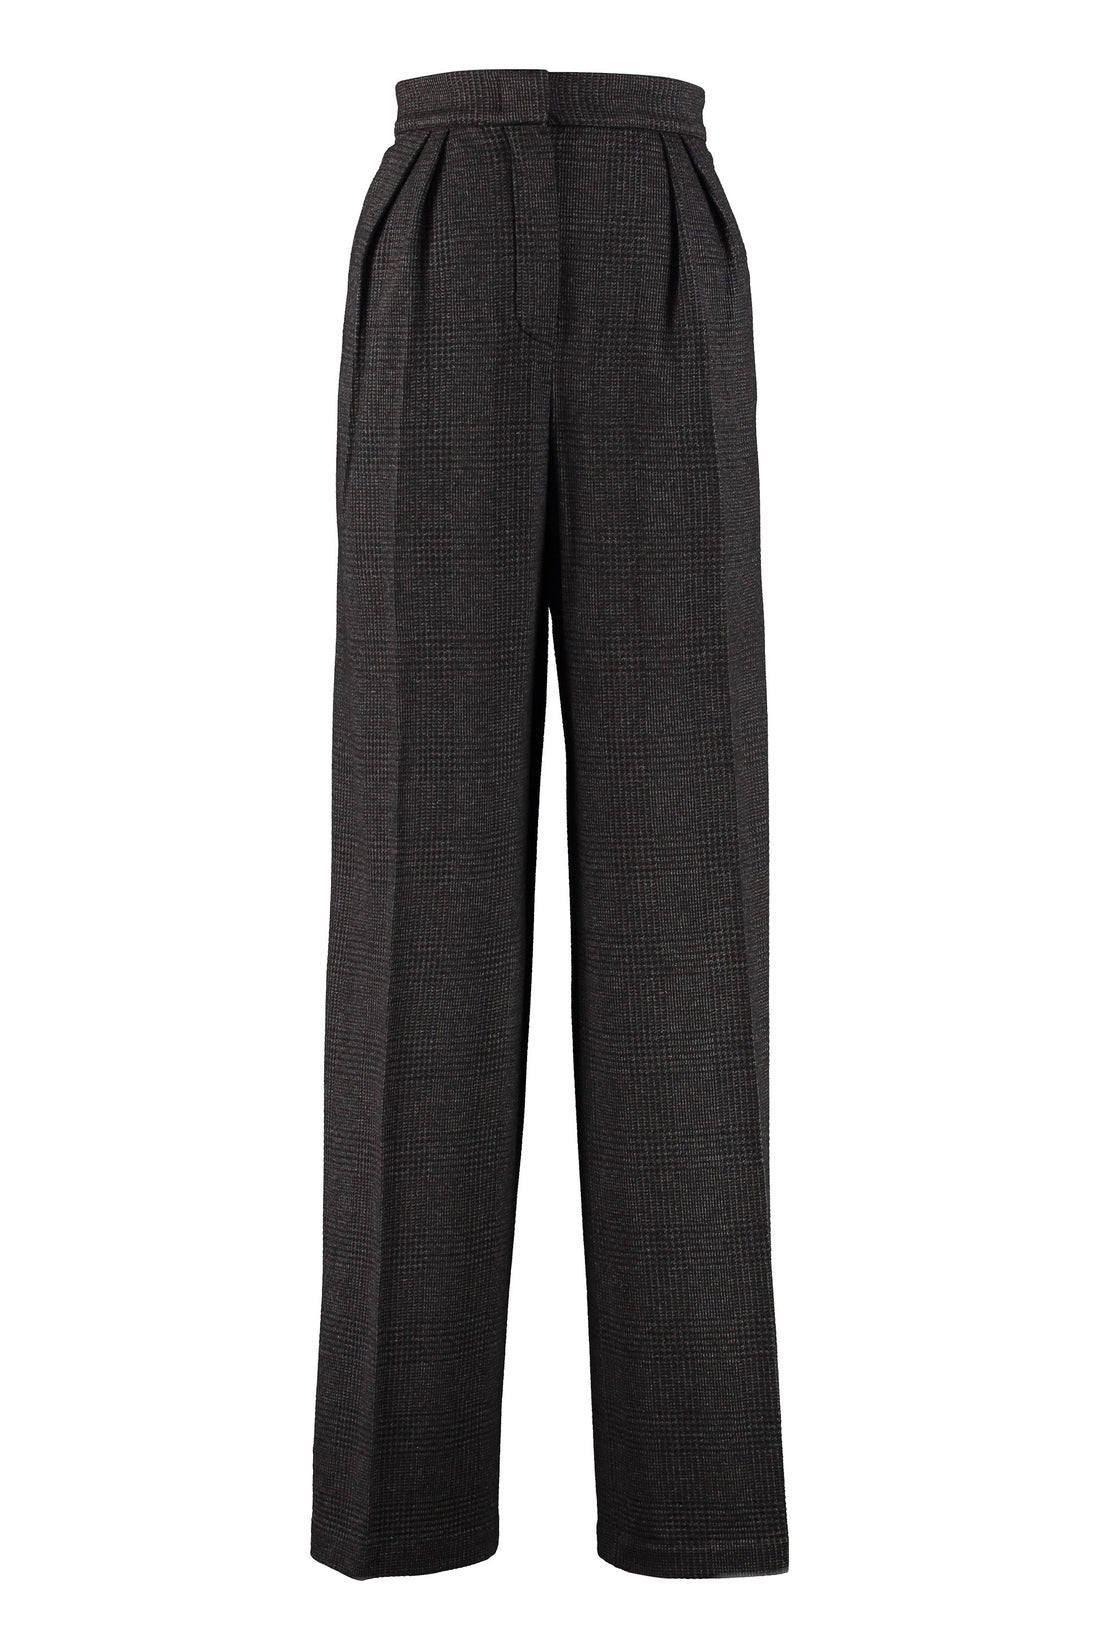 Max Mara-OUTLET-SALE-Prince of Wales check trousers-ARCHIVIST